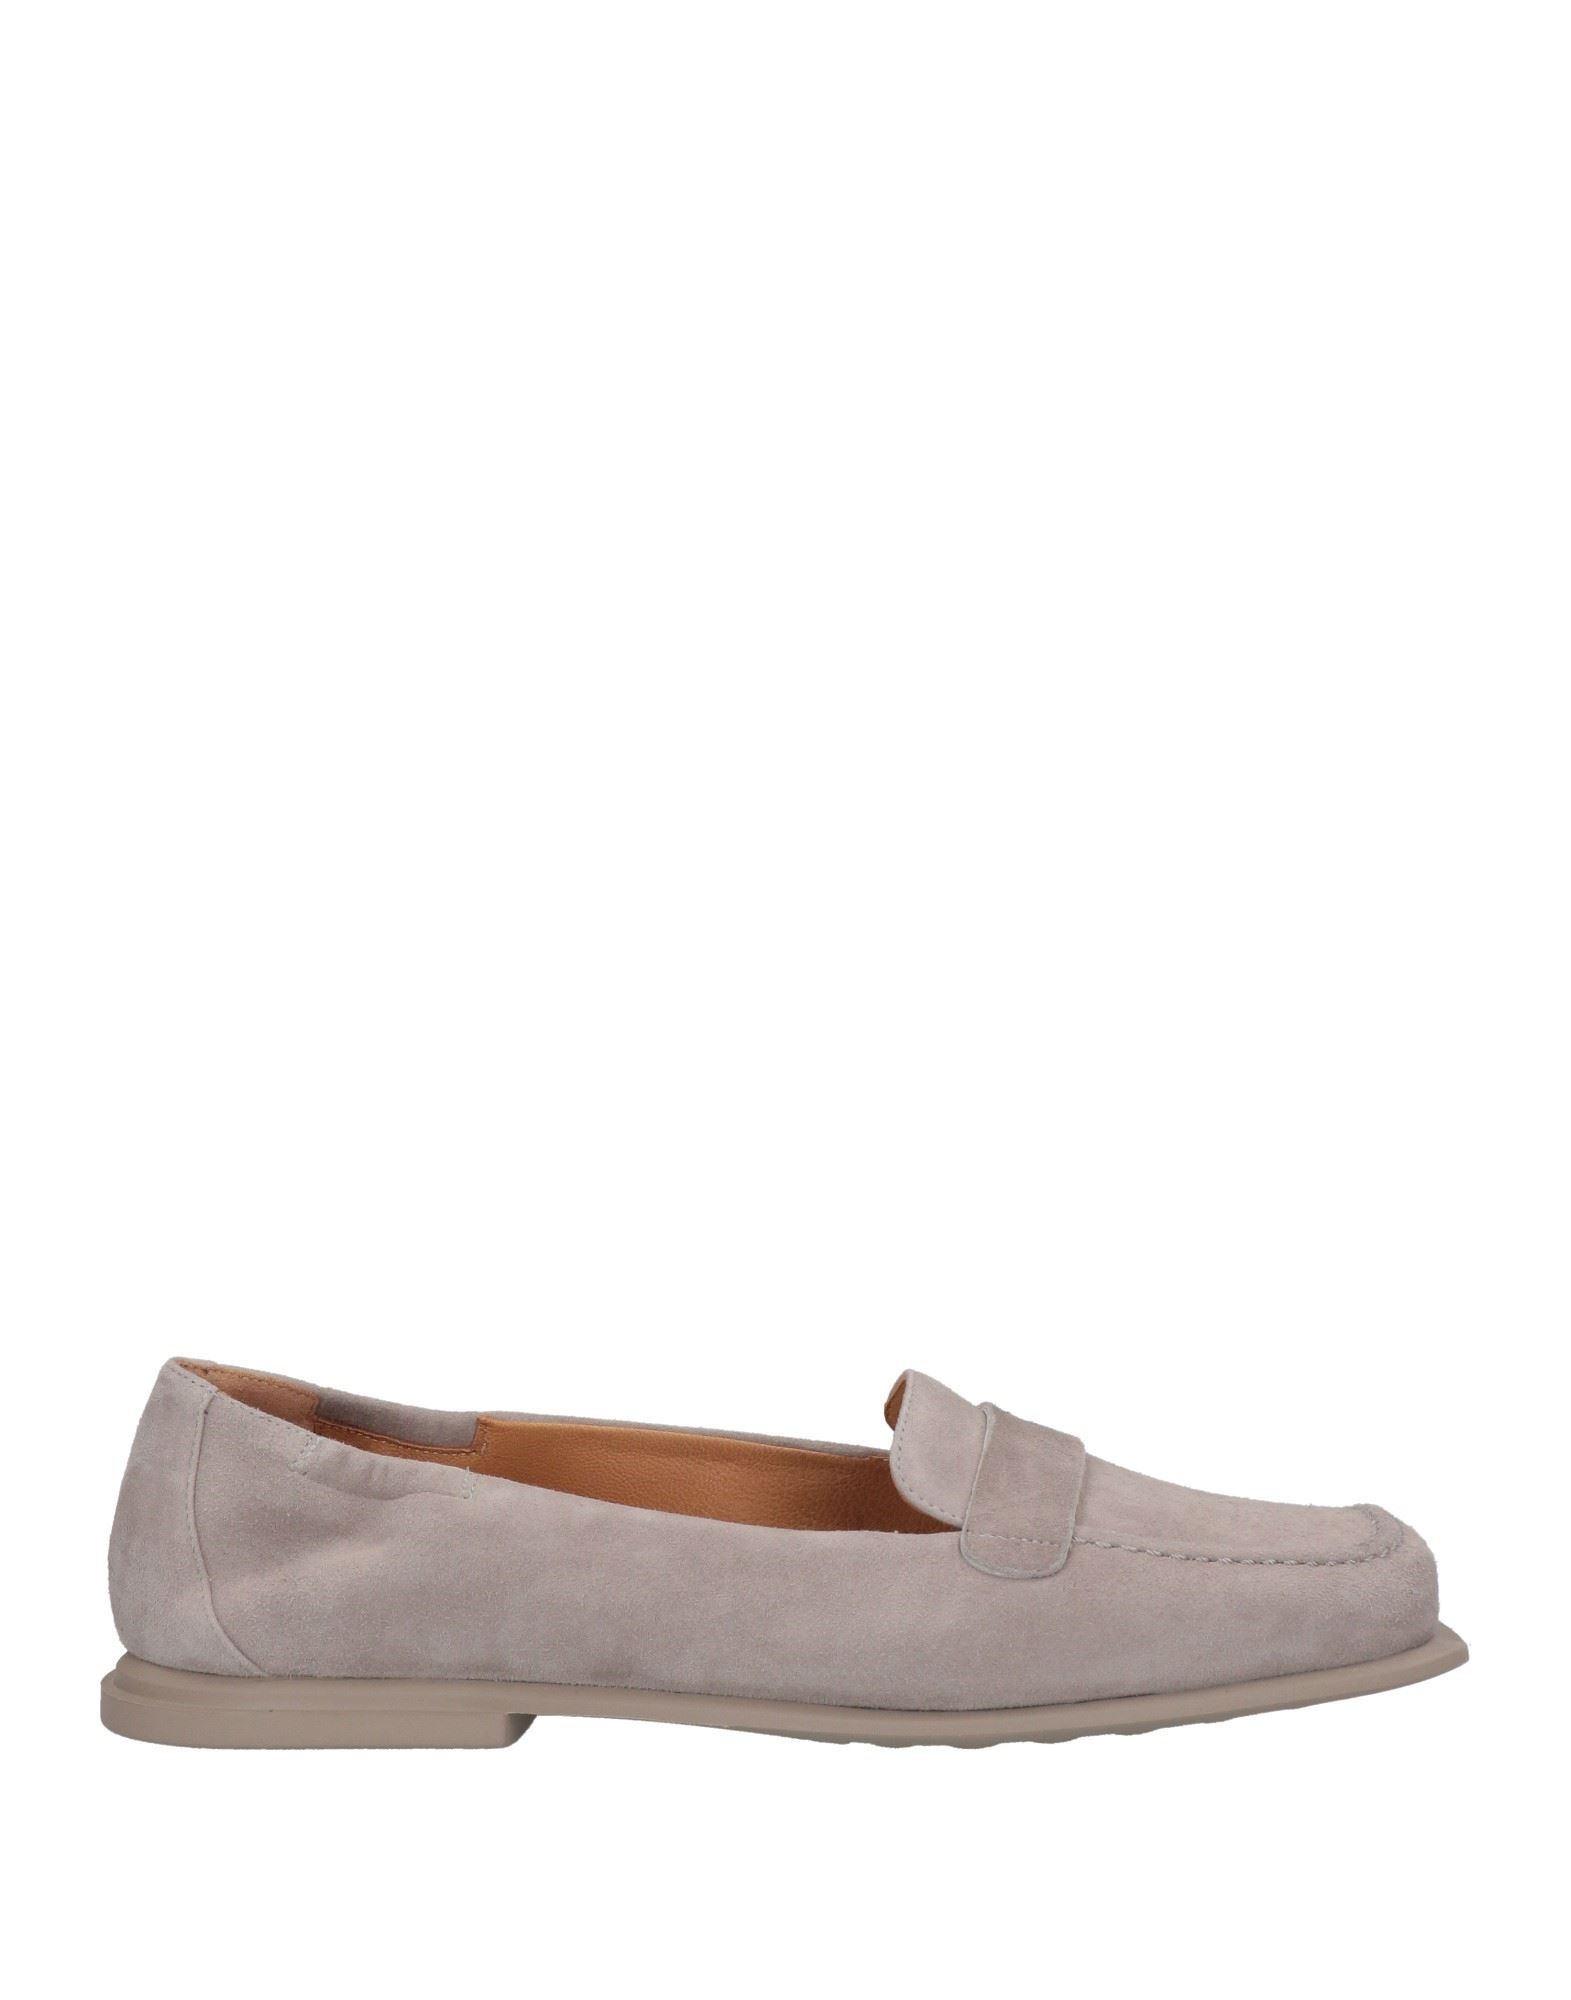 Shop Pomme D'or Woman Loafers Light Grey Size 6.5 Soft Leather